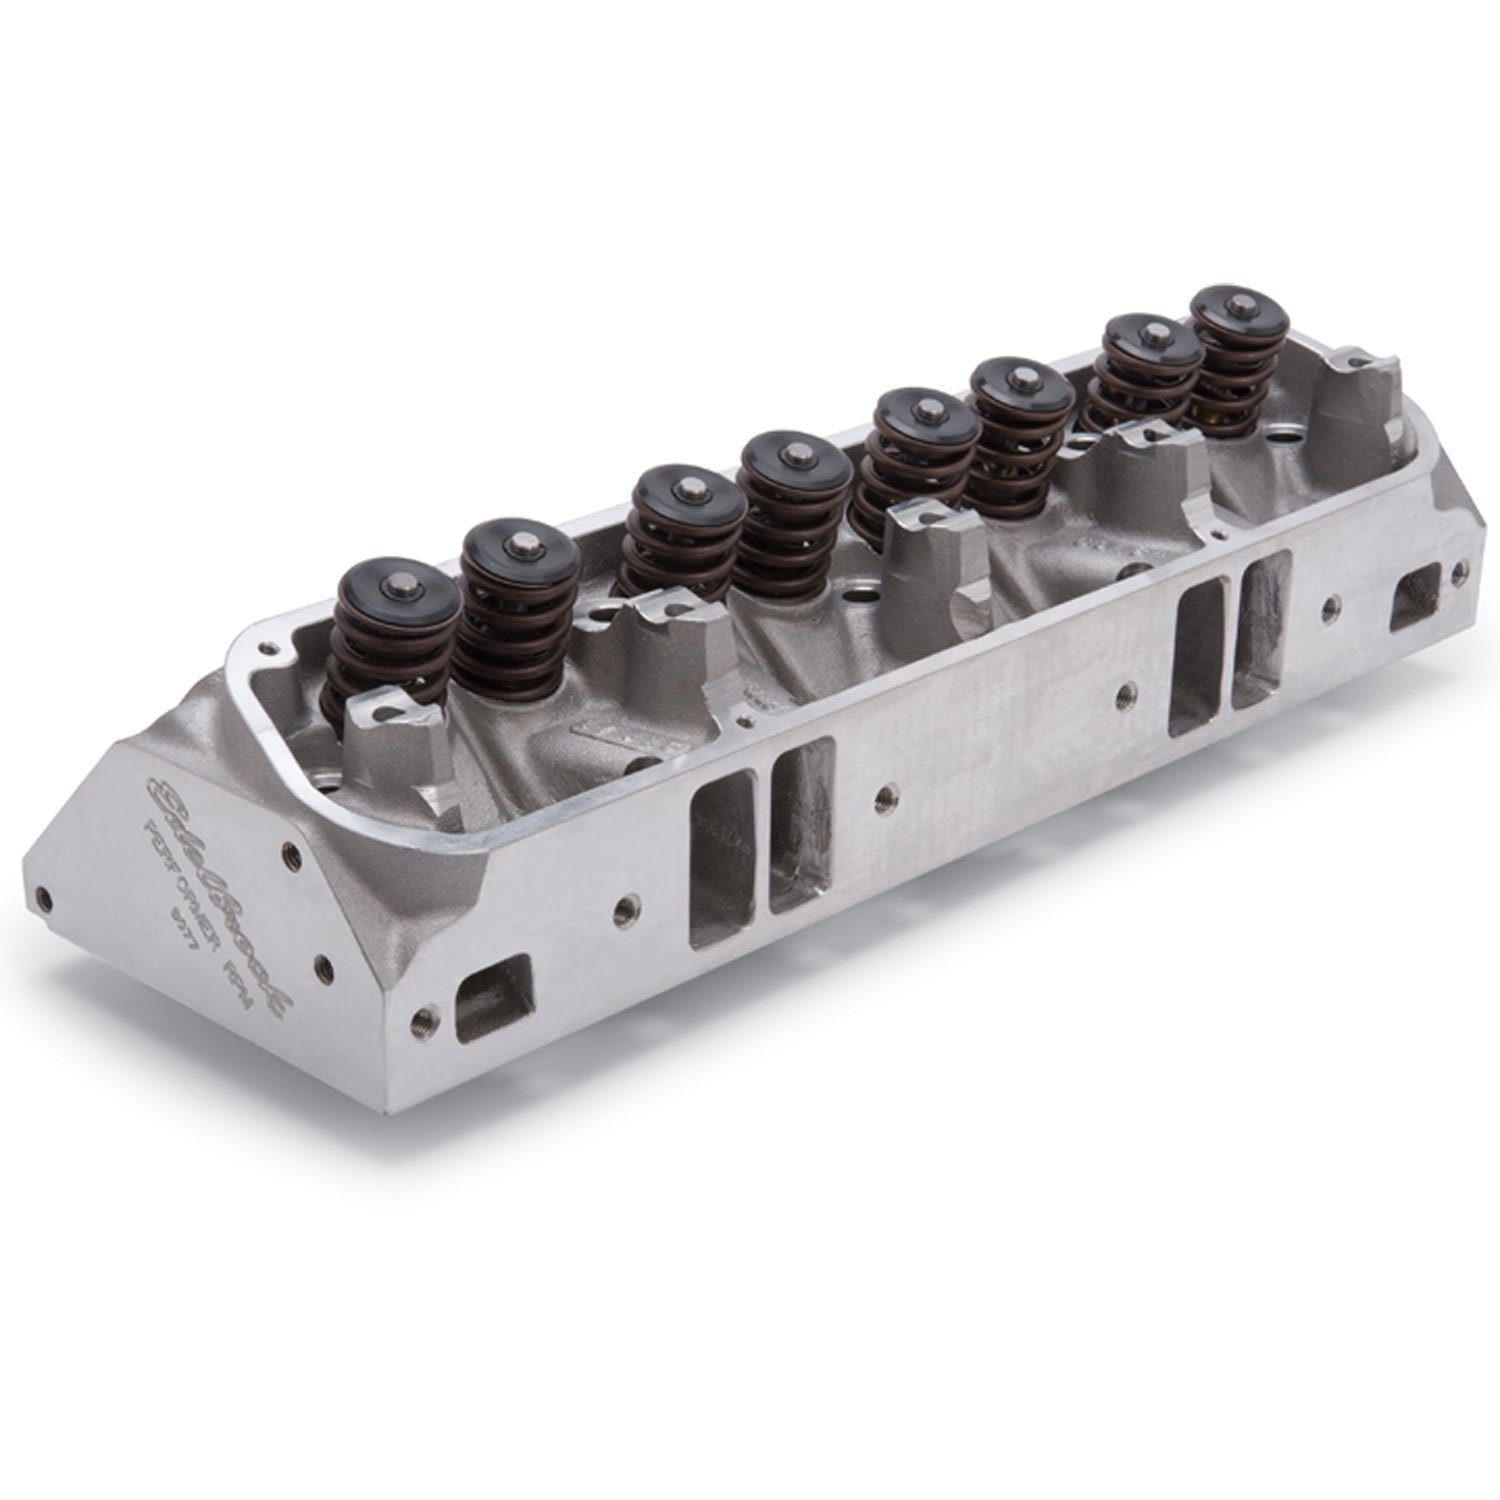 JEGS Introduces New Magnum Cylinder Head Assembly for Mopar